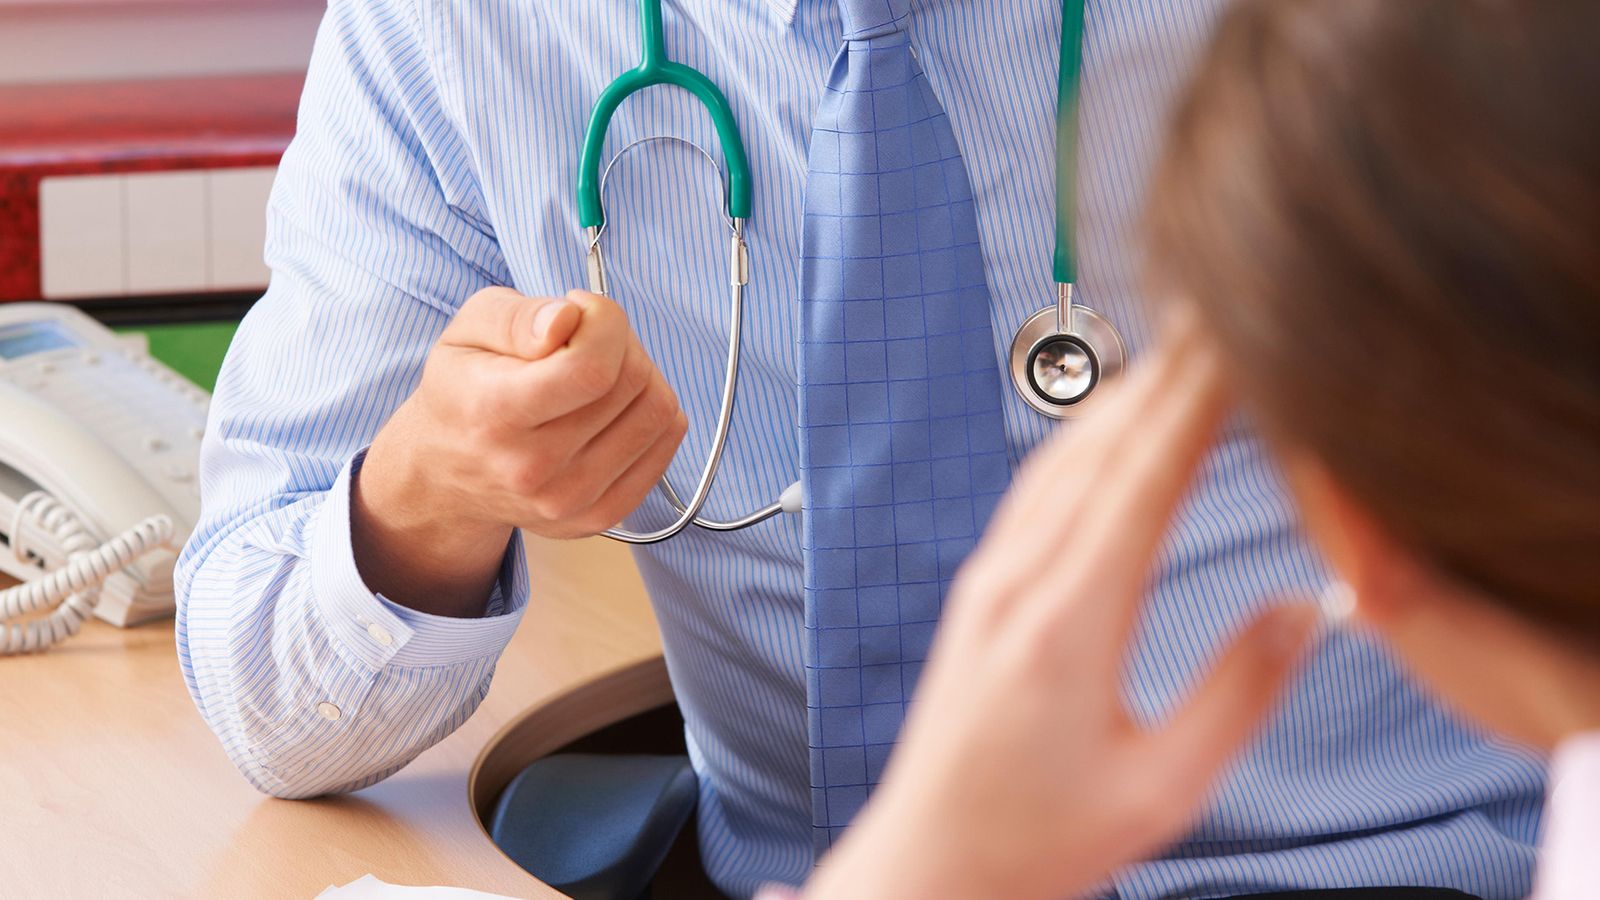 Launch of controversial system to collect GP patient data delayed amid privacy concerns